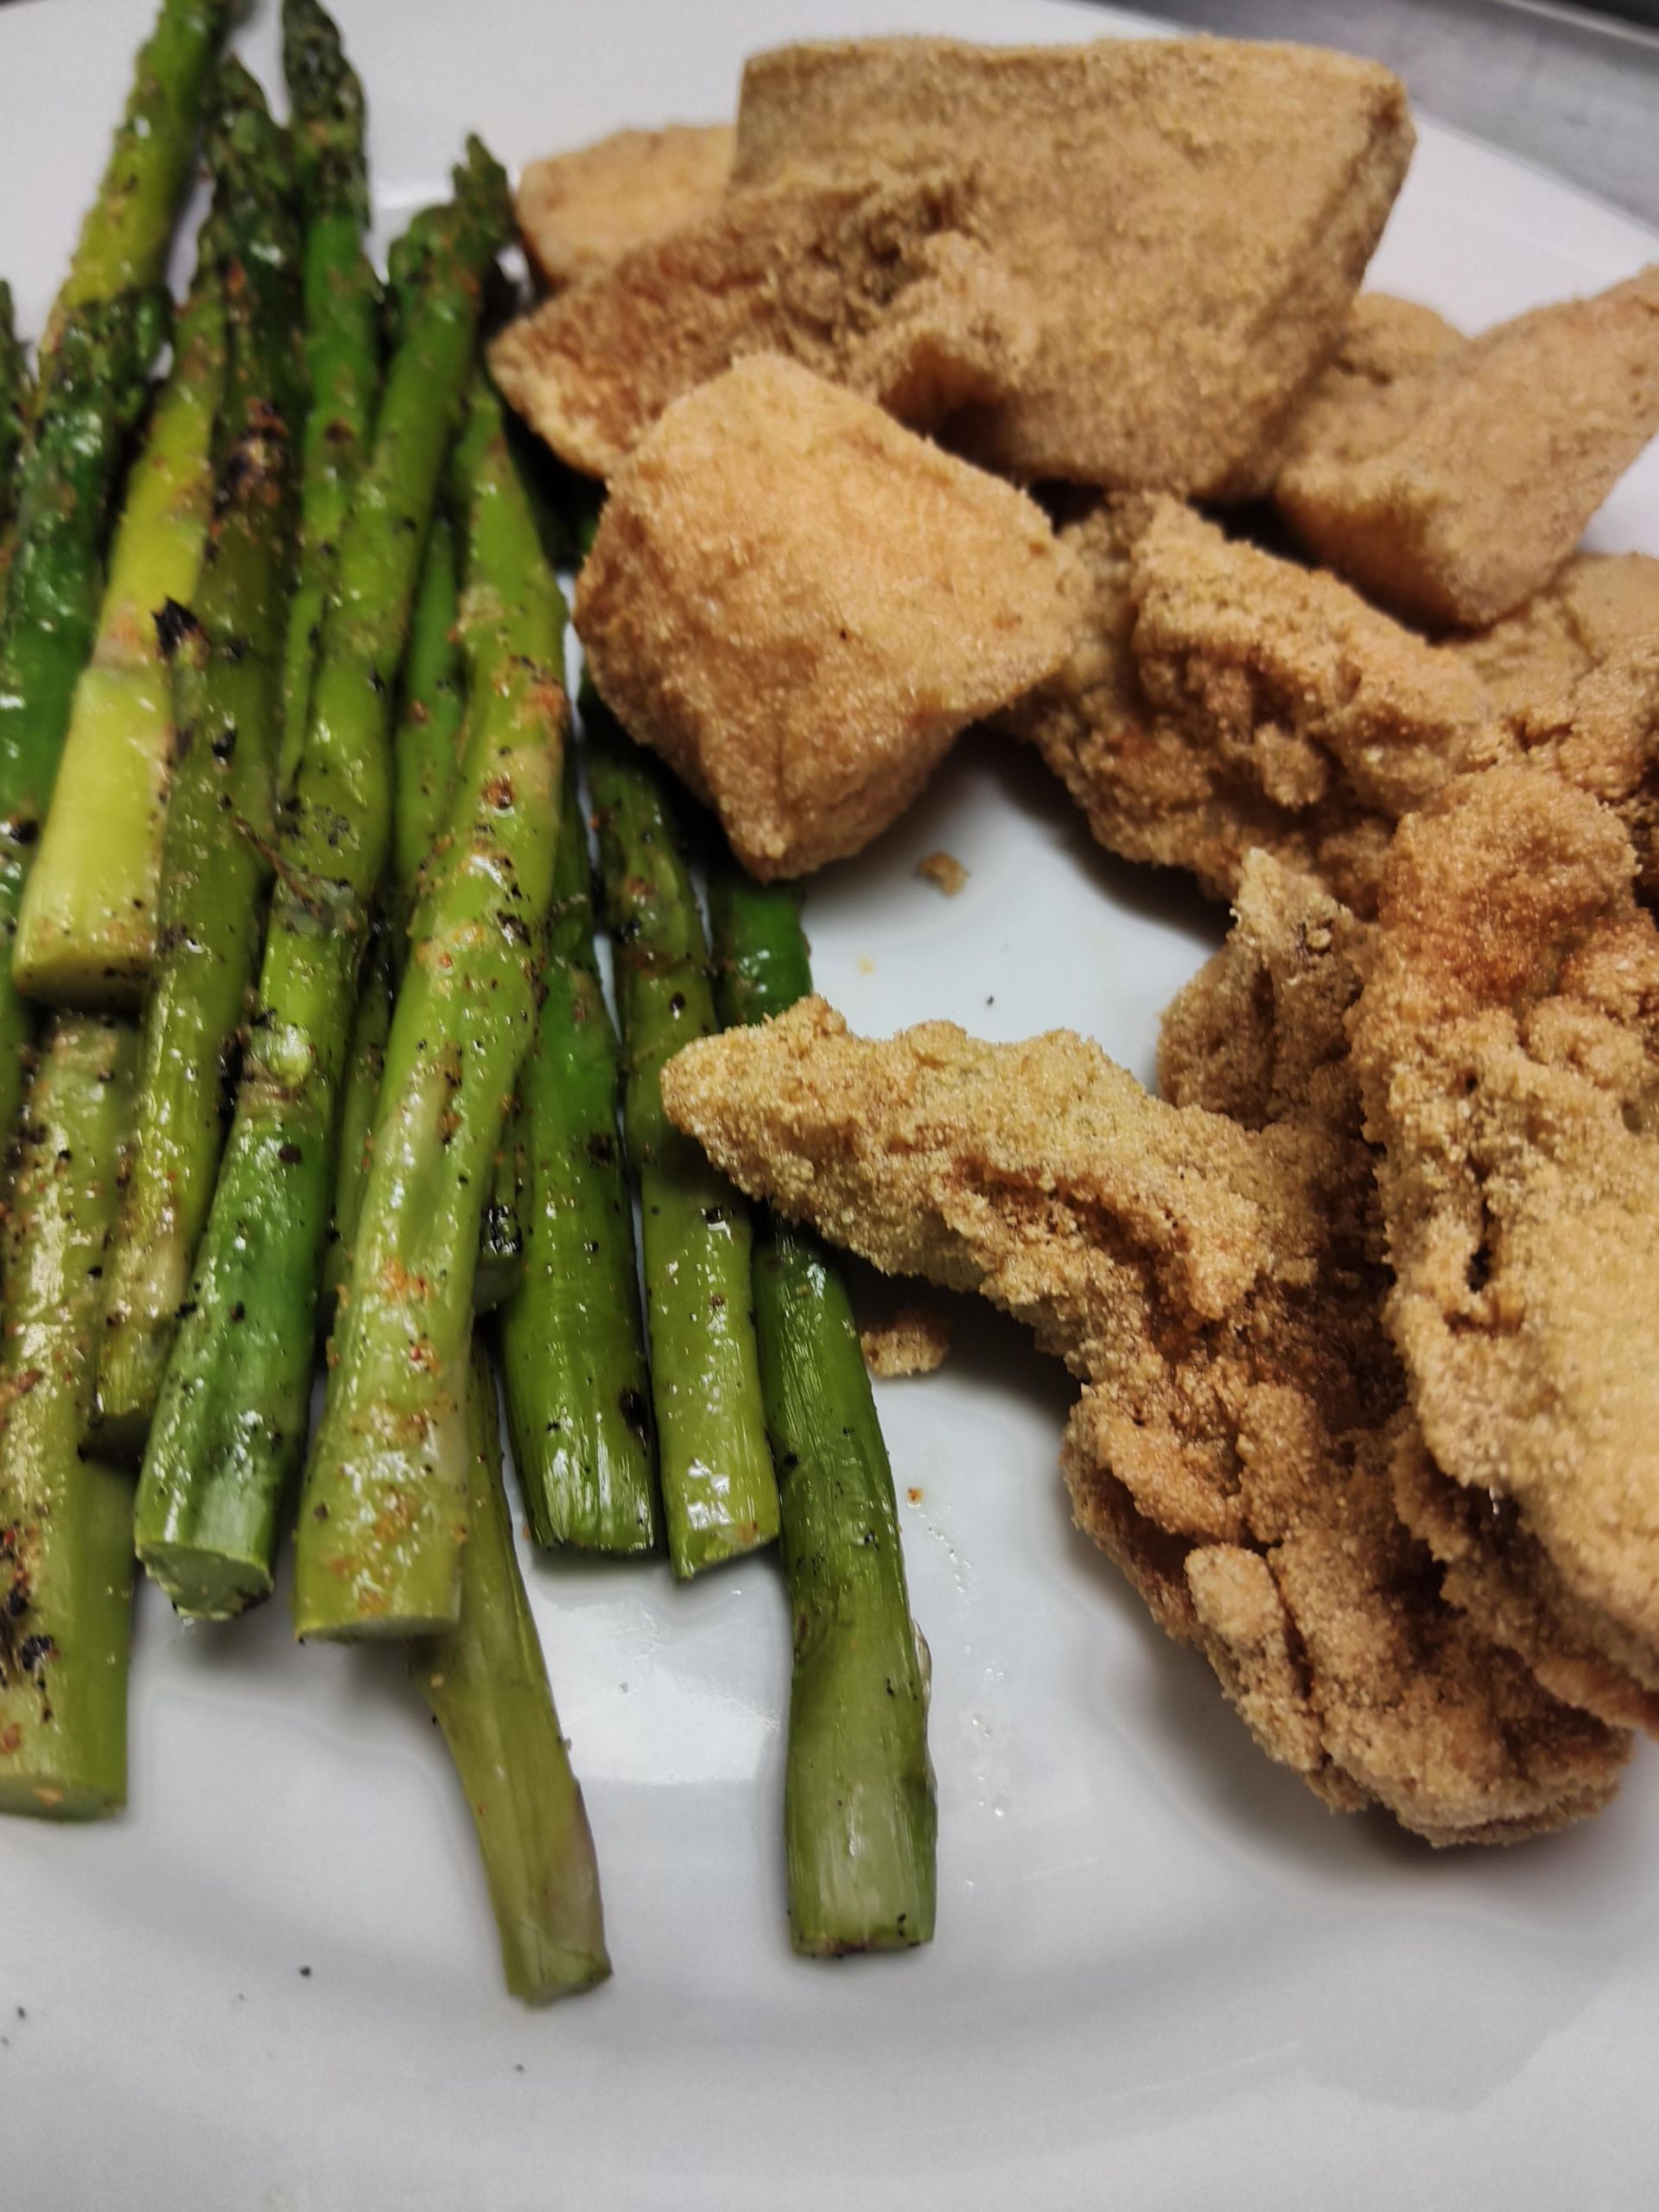 Cornmeal Fried Fish
 "healthy eating" cornmeal fried fish with asparagus